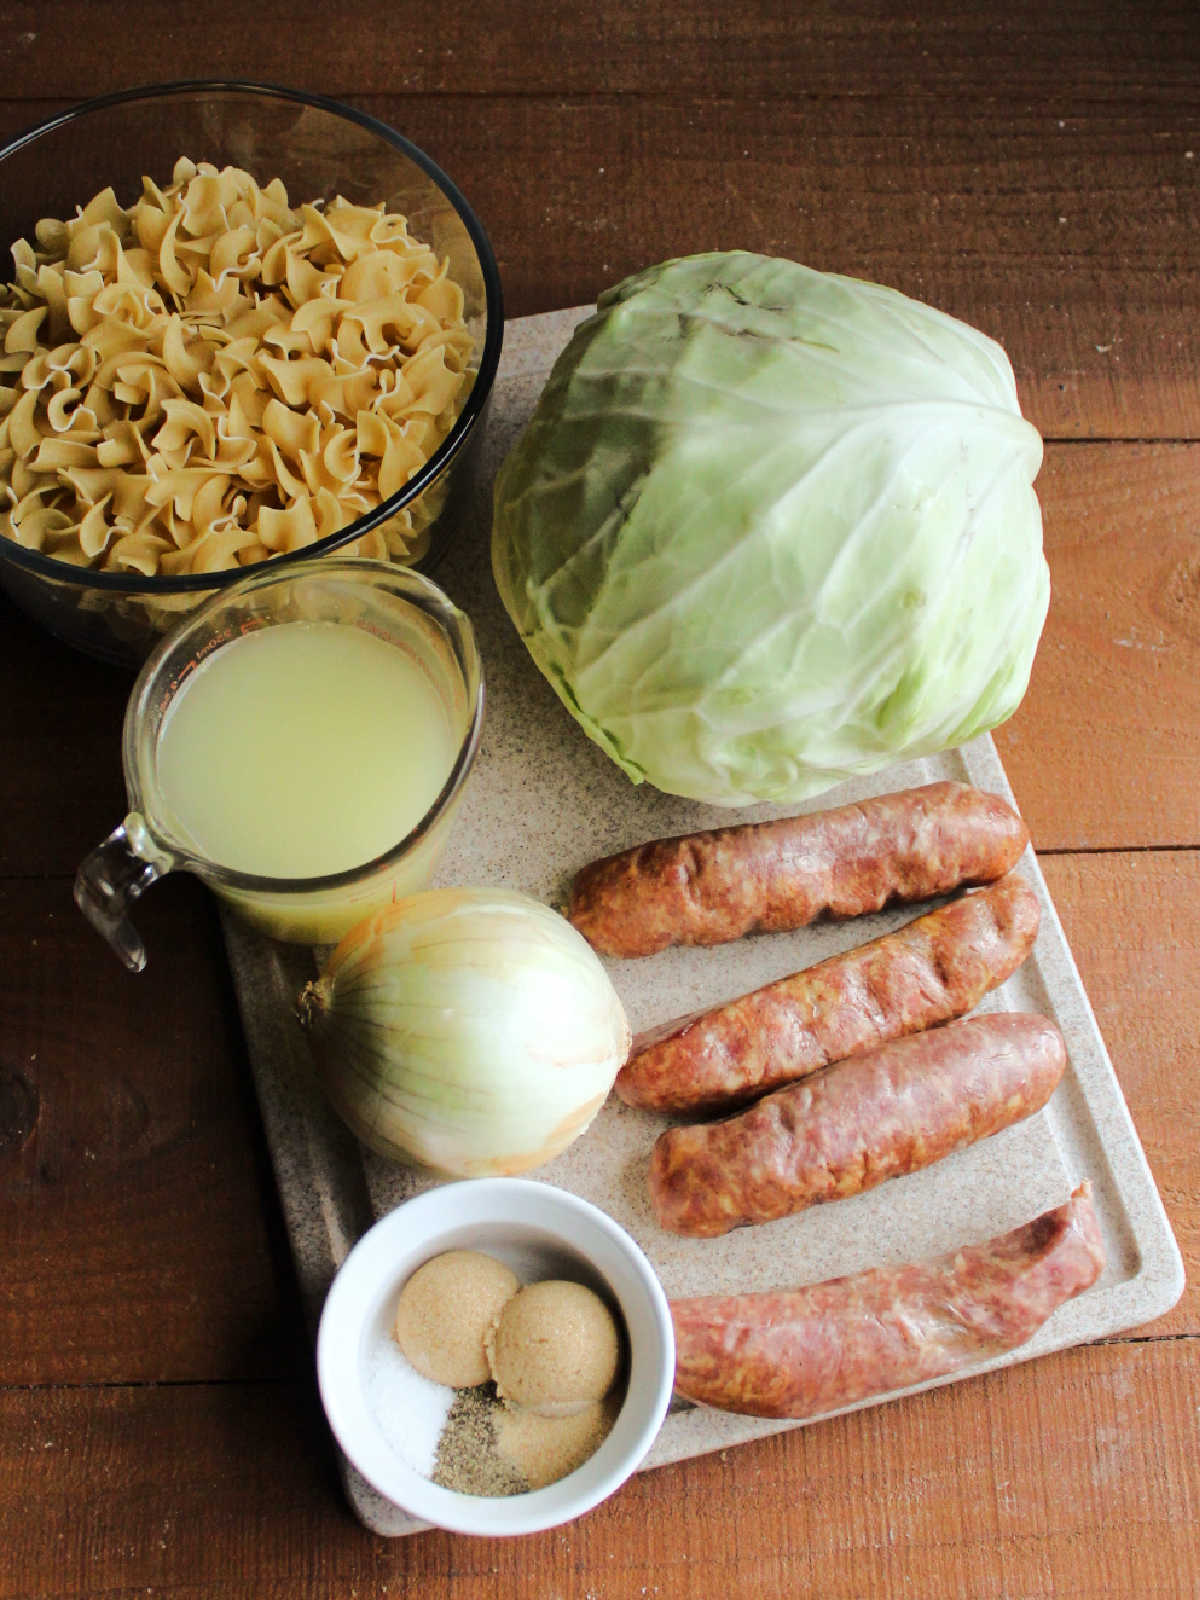 Ingredients including cabbage, kielbasa, onion, chicken broth, brown sugar, salt, pepper, garlic powder and egg noodles ready to be made into haluski.